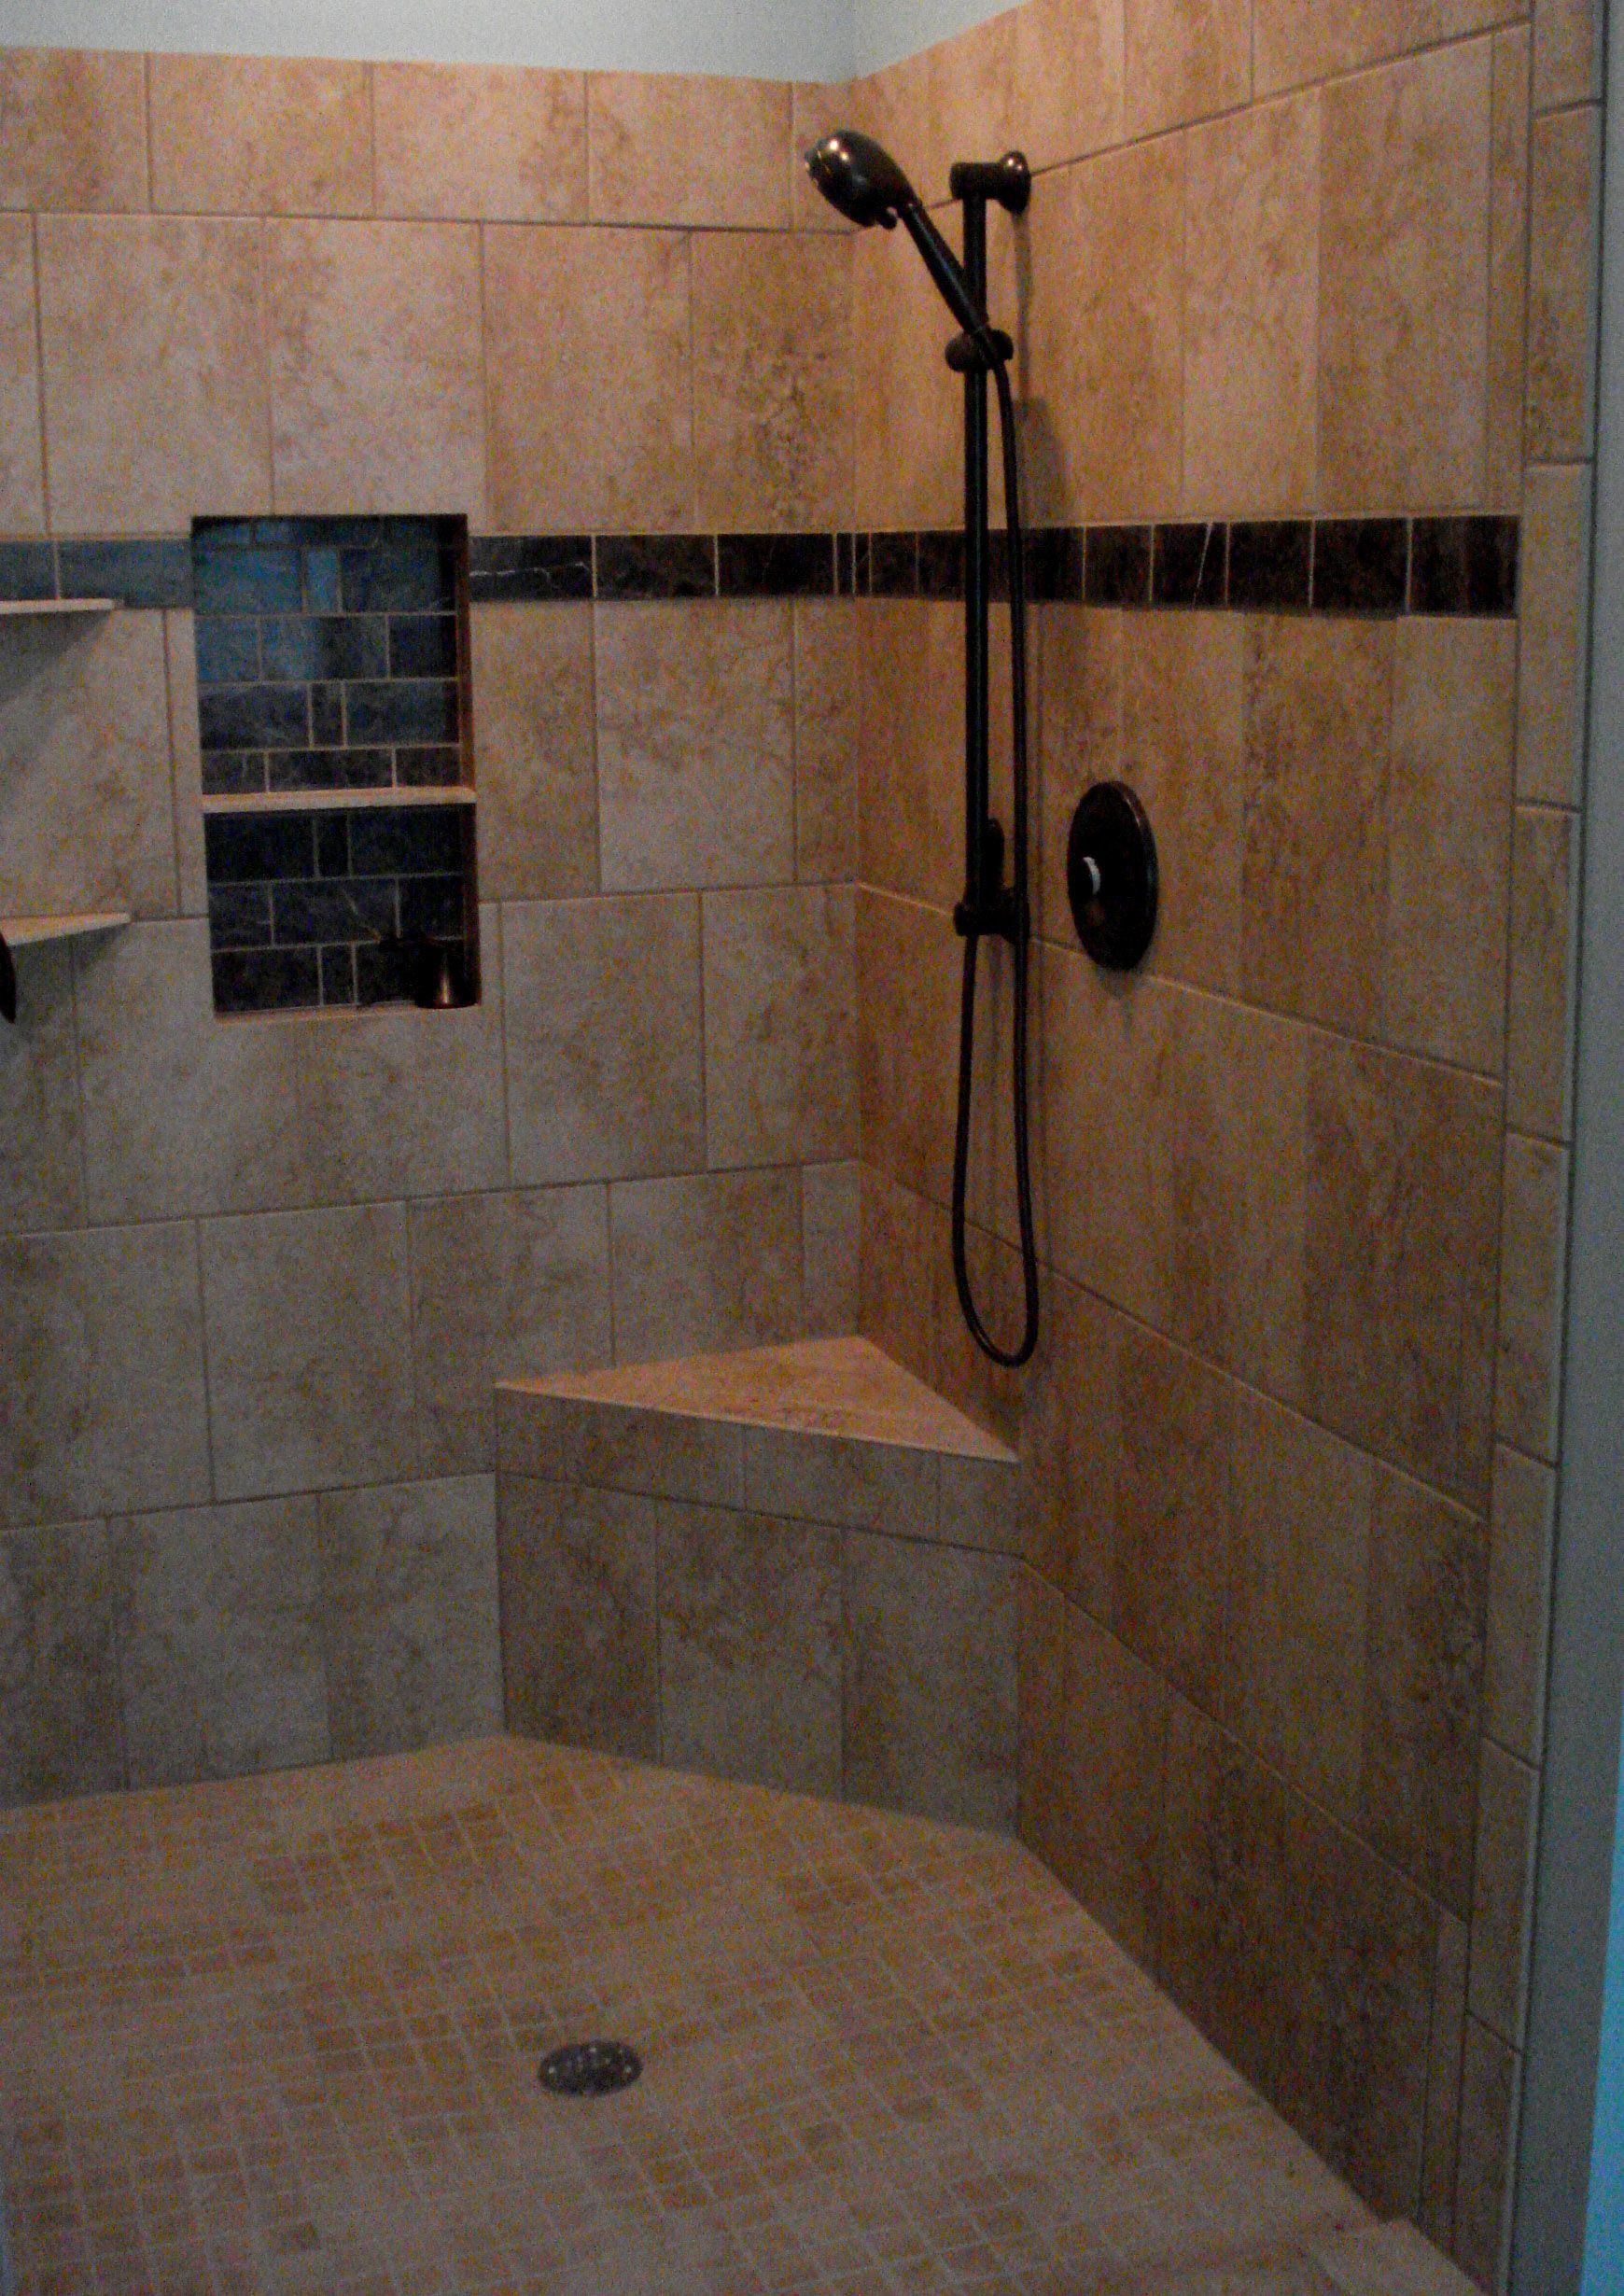 Bathroom Shower Tiles Ideas
 Tile Shower Ideas Affecting the Appearance of the Space